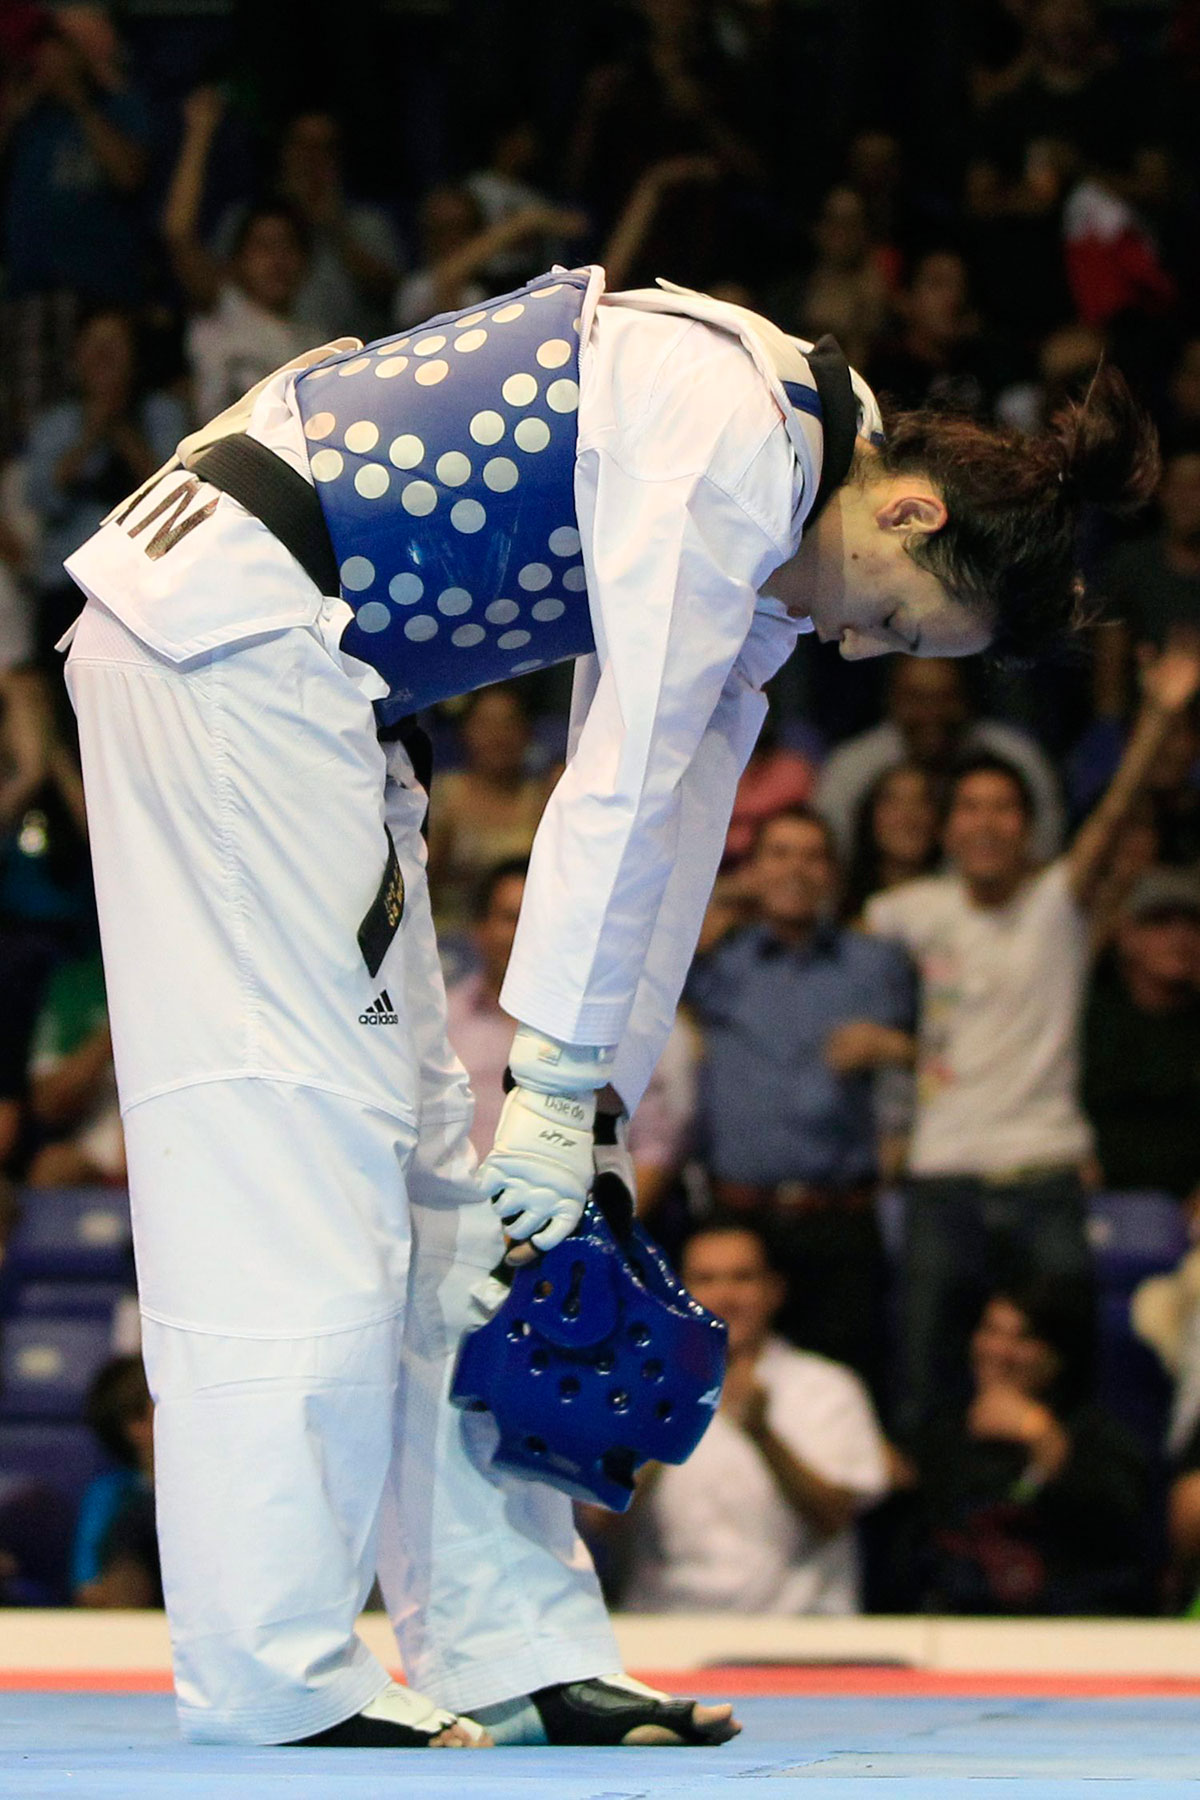 Melissa Pagnotta bows after winning Pan Am Games gold in Guadalajara, Mexico on October 17, 2011.